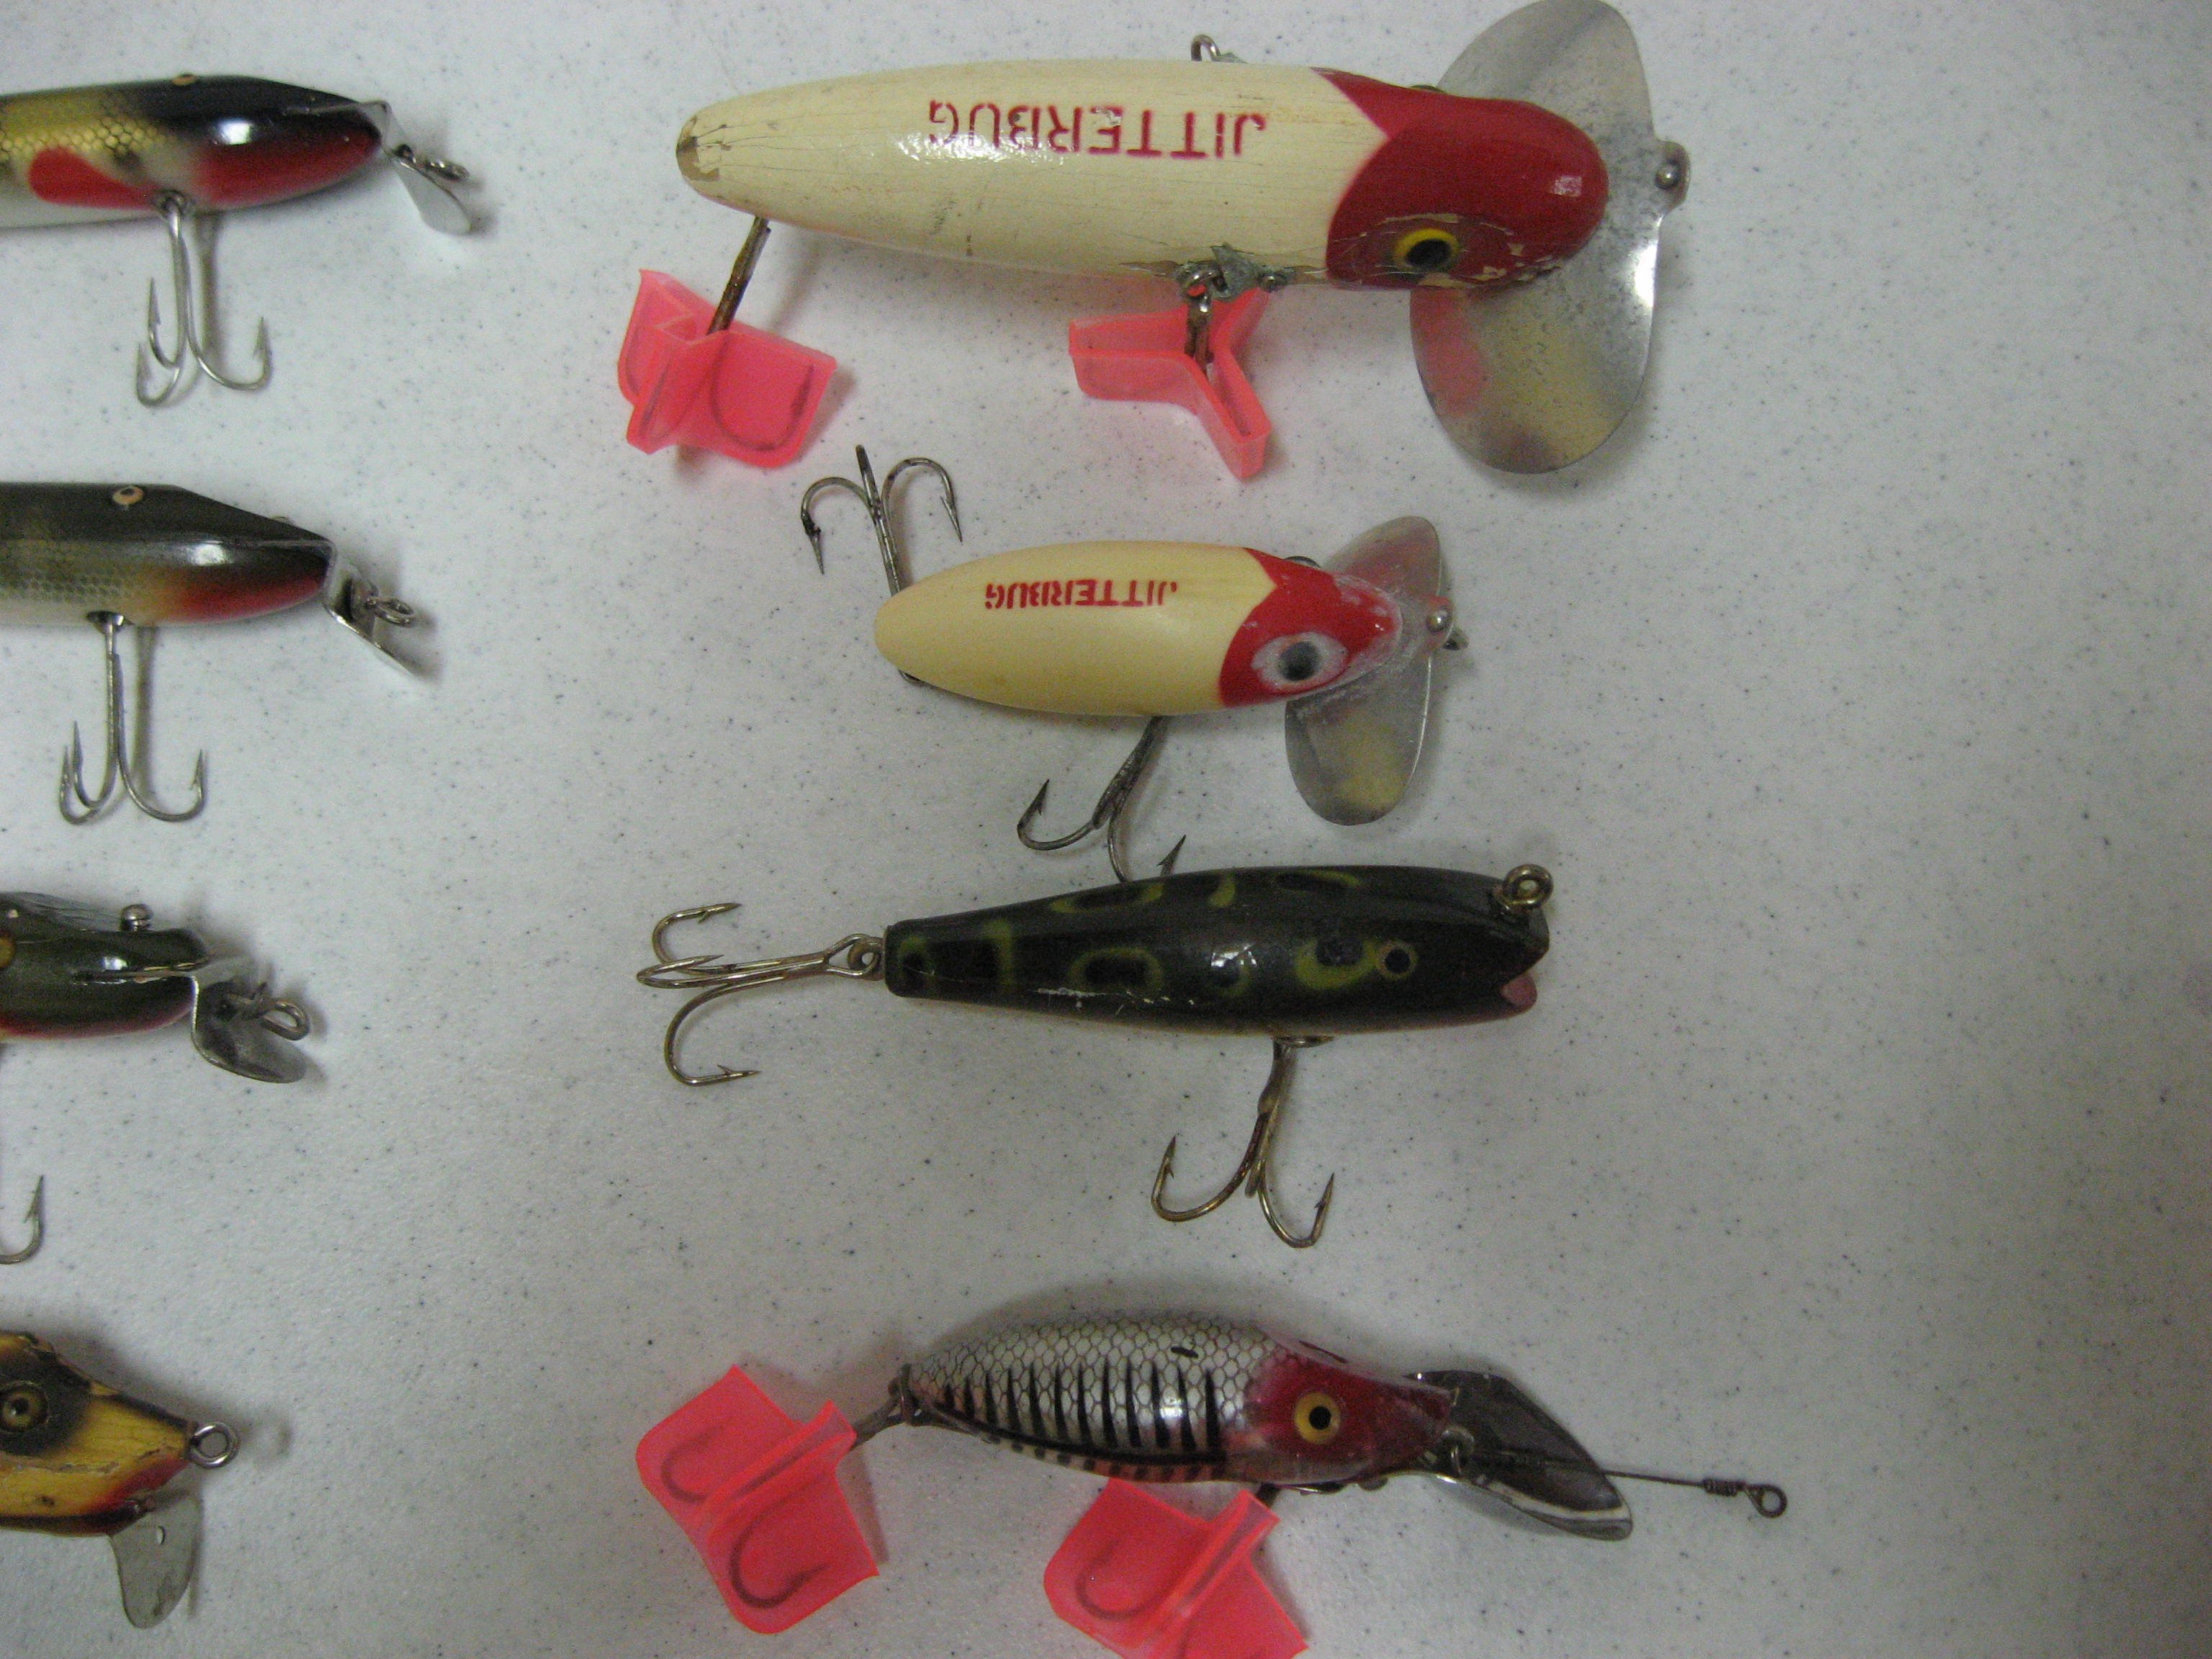 Old Lures - General Discussion Forum - General Discussion Forum